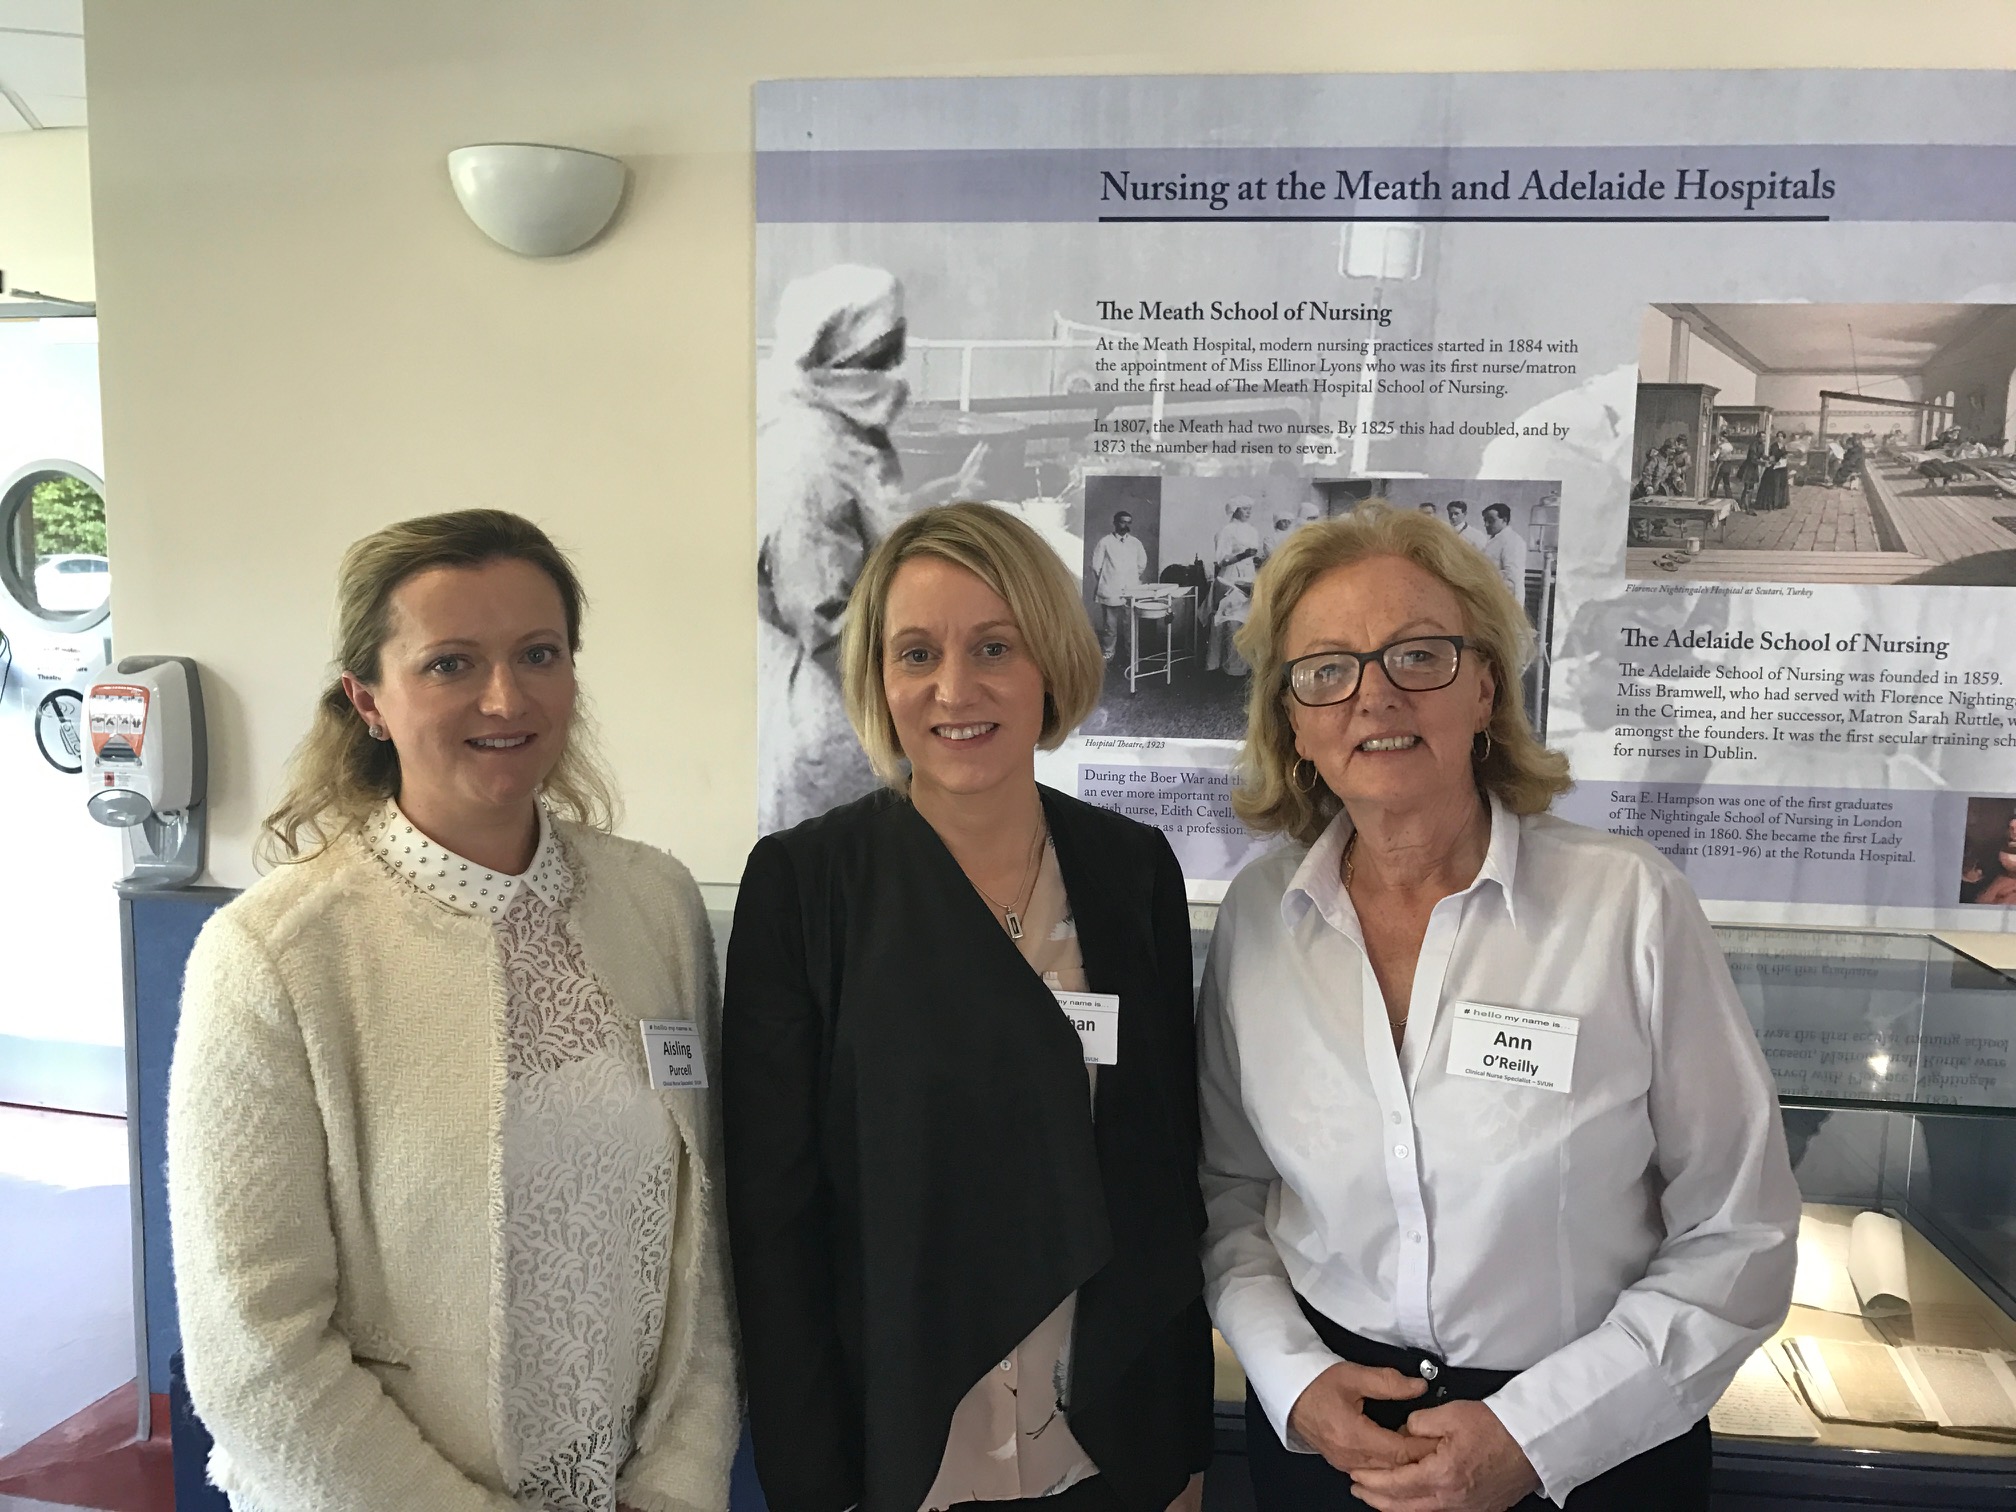 Aishling Purcell, Siobhain Bulfin and Ann O'Reilly, Occupational Health Clinical Nurse Specialists at St Vincent's Hospital, Elm Park, Dublin who attended the annual conference of the Workplace Health and Wellbeing Unit, HSE HR Division at Tallaght Hospital in May 2017. 